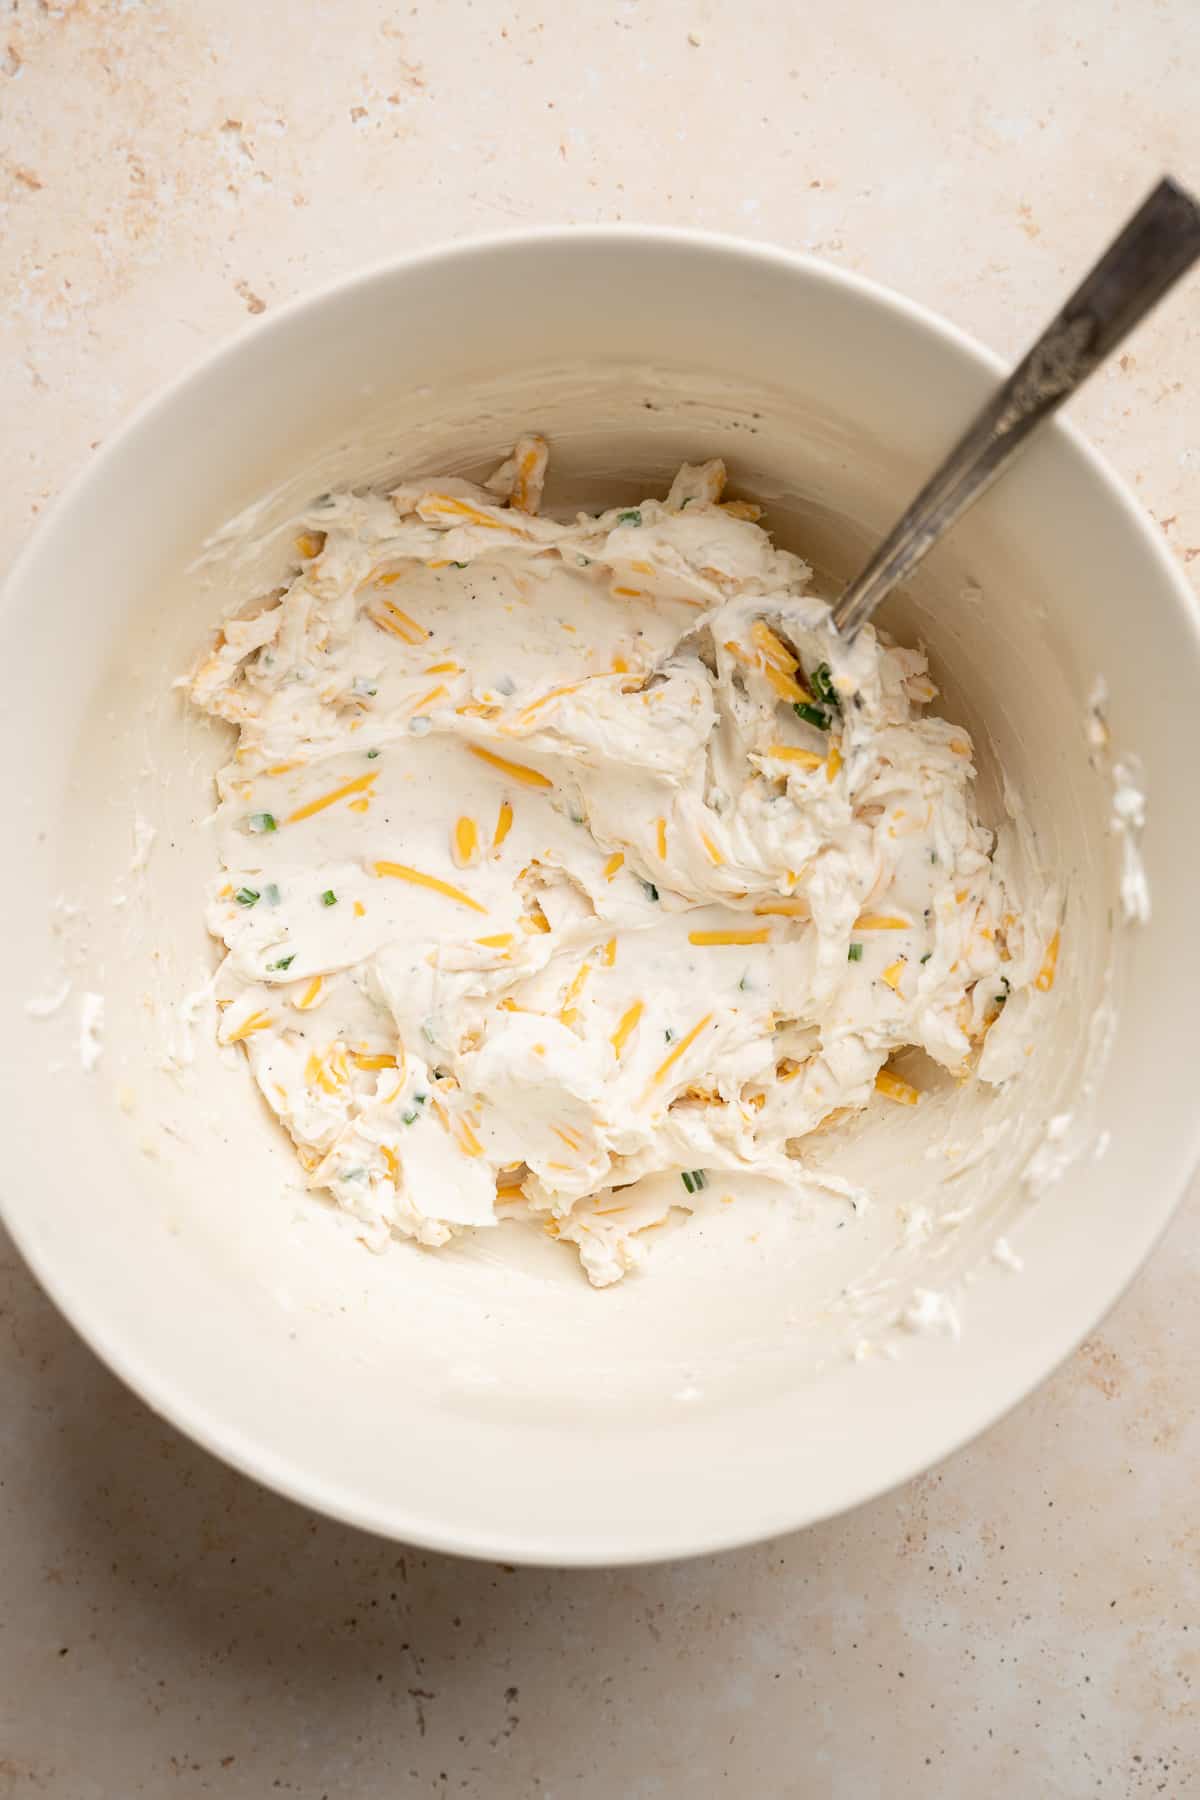 cream cheese mixture for filling jalapeno poppers in a bowl.